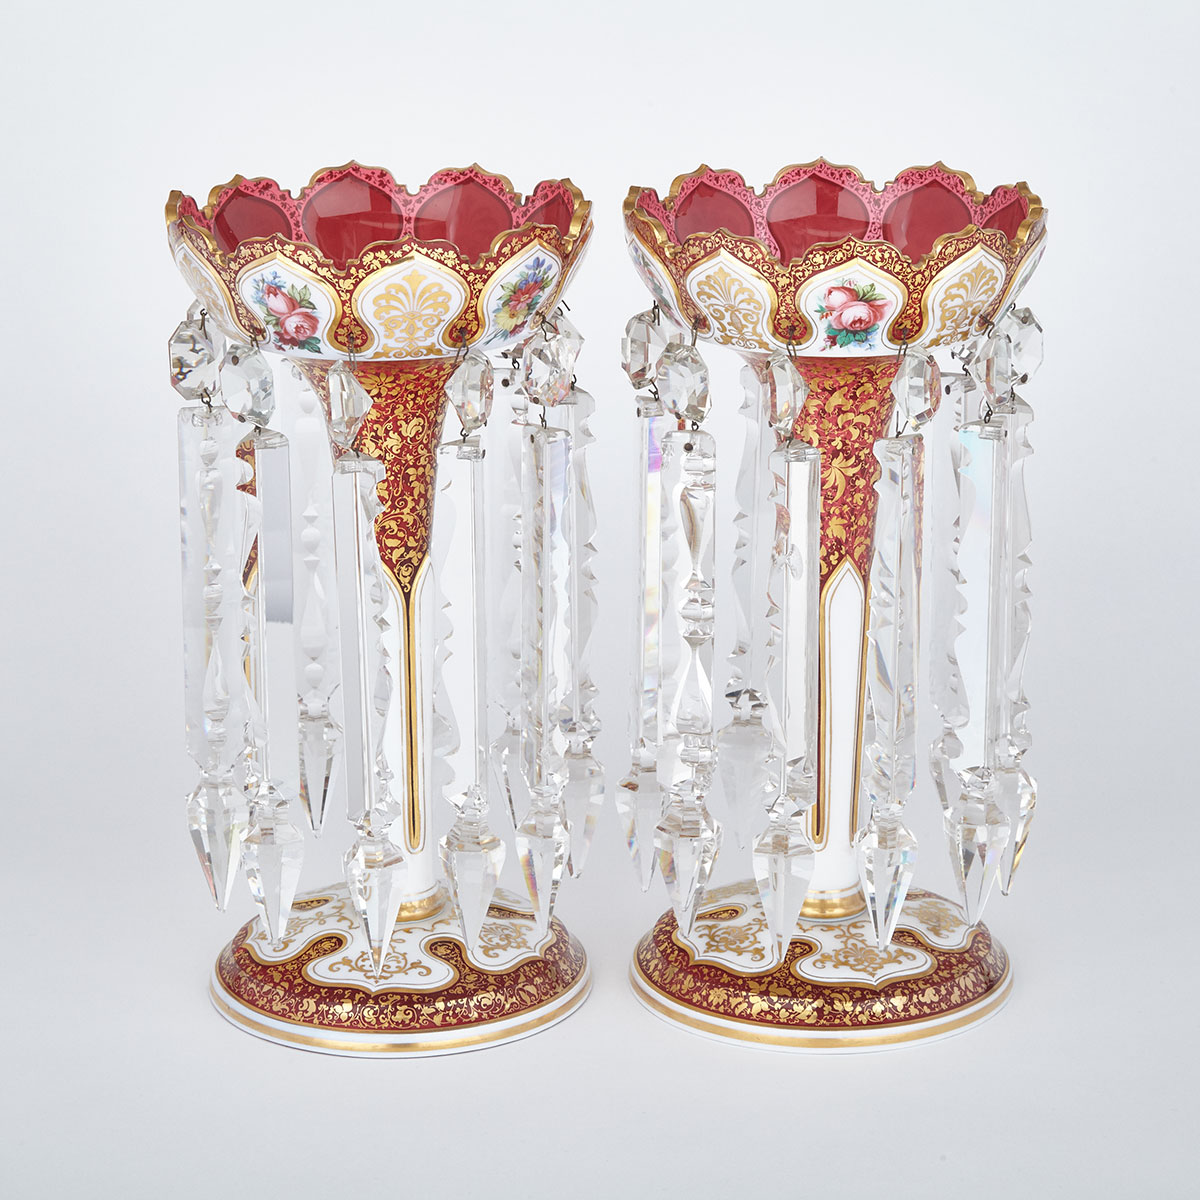 Pair of Bohemian Overlaid and Enameled Red Glass Lustres, late 19th century